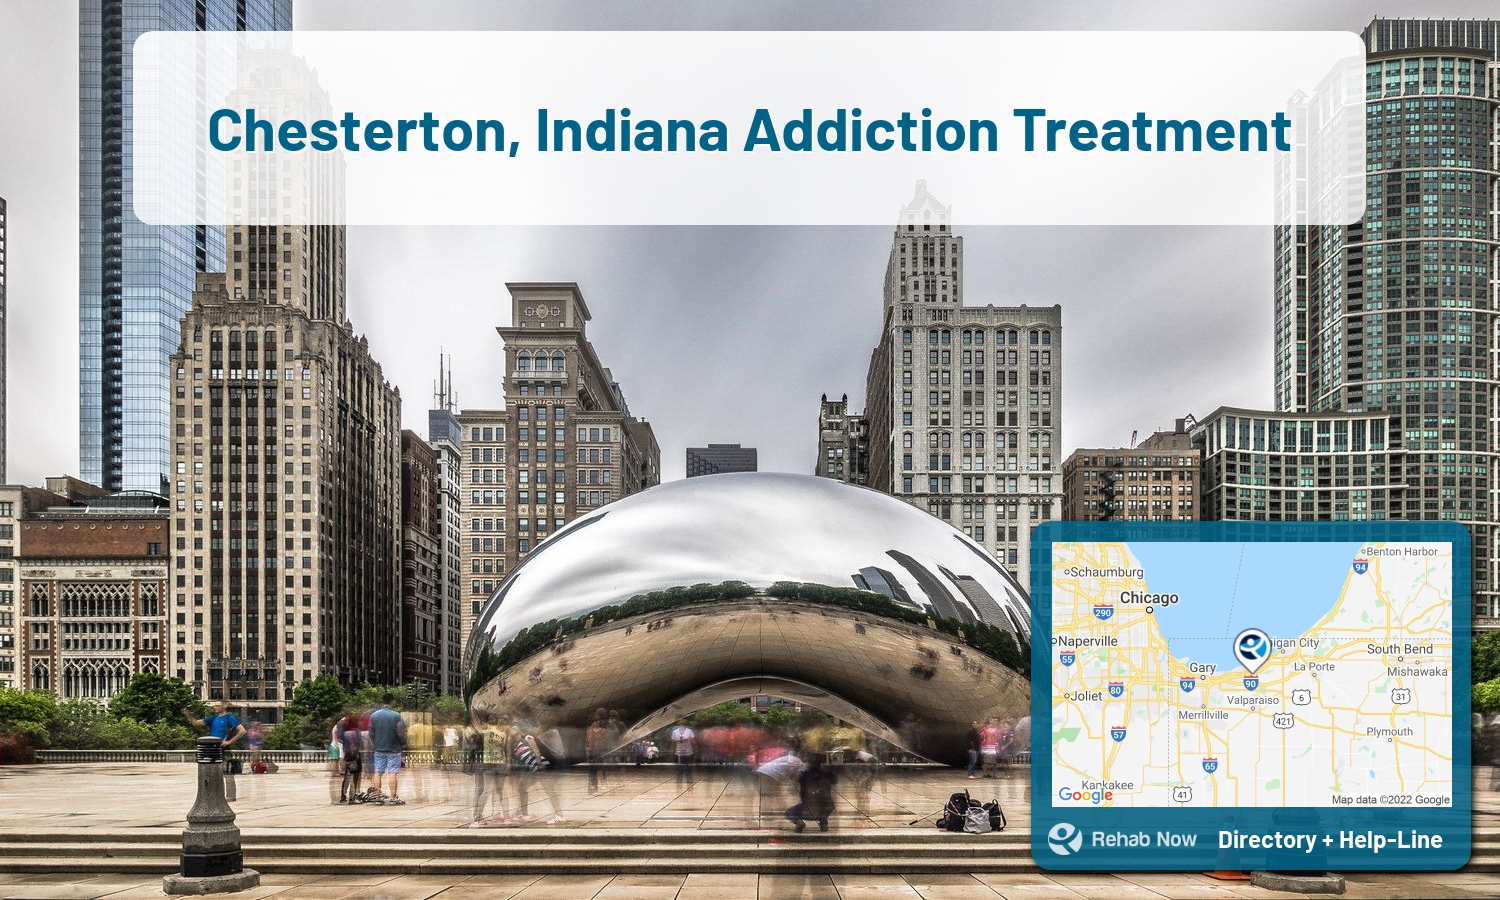 View options, availability, treatment methods, and more, for drug rehab and alcohol treatment in Chesterton, Indiana